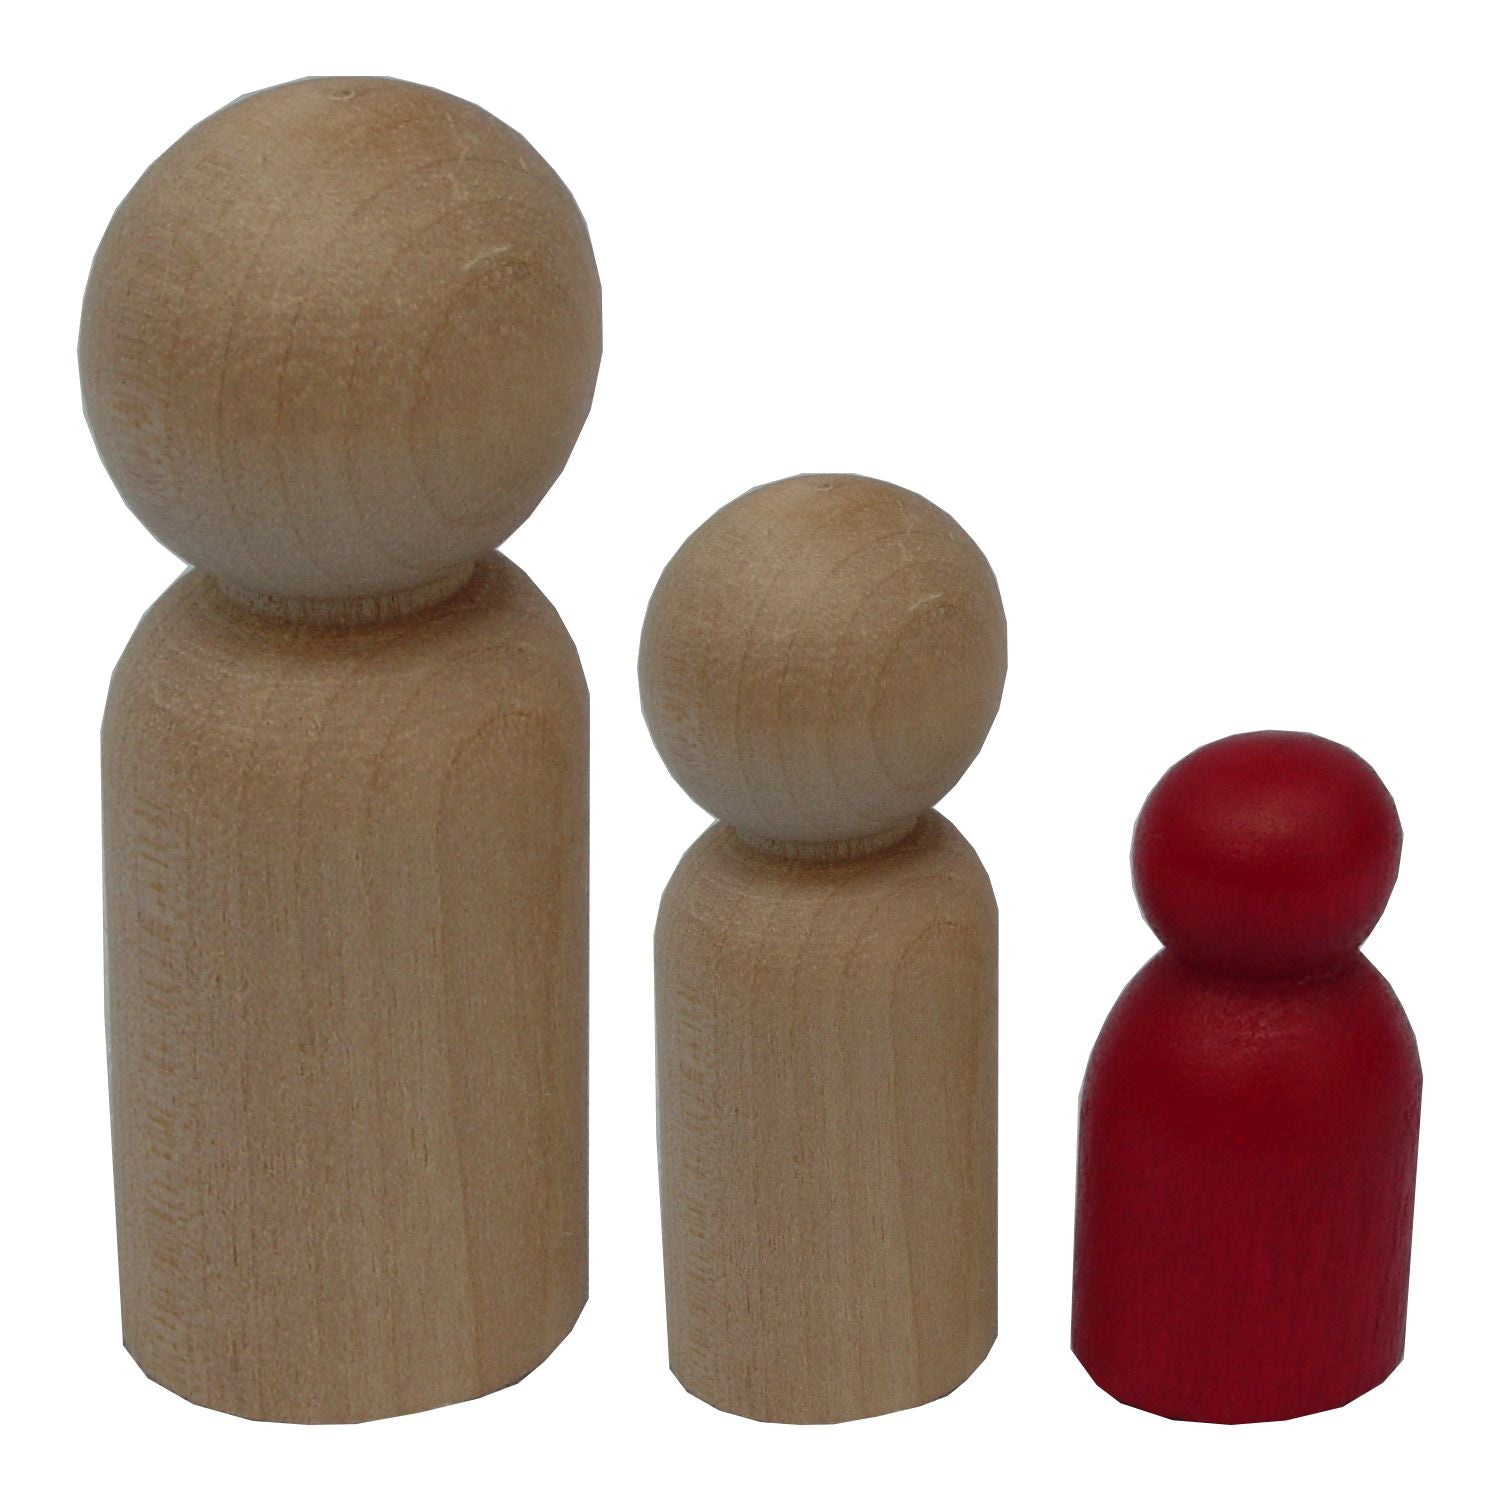 Wood Pawn Mounts - Rubber Stamp Materials